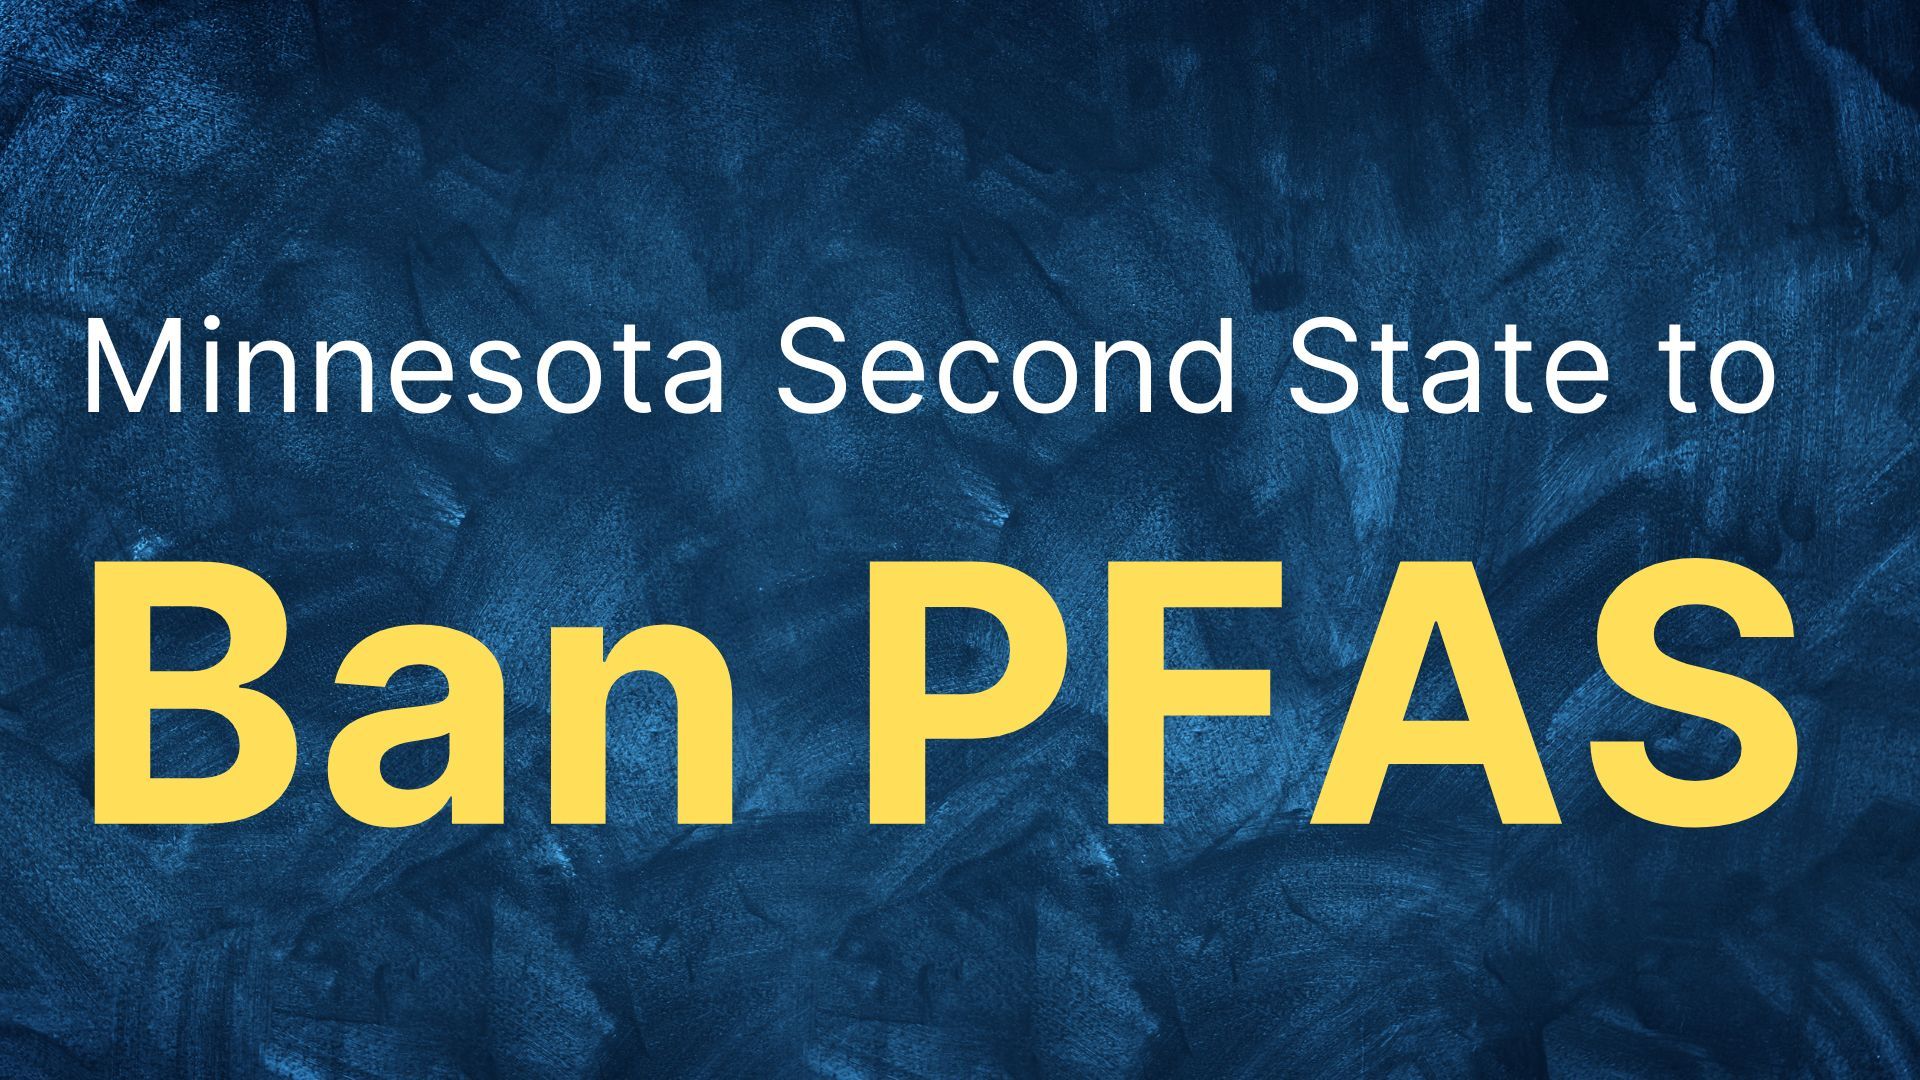 Minnesota Becomes Second State to Pass Sweeping PFAS Ban and Reporting Law